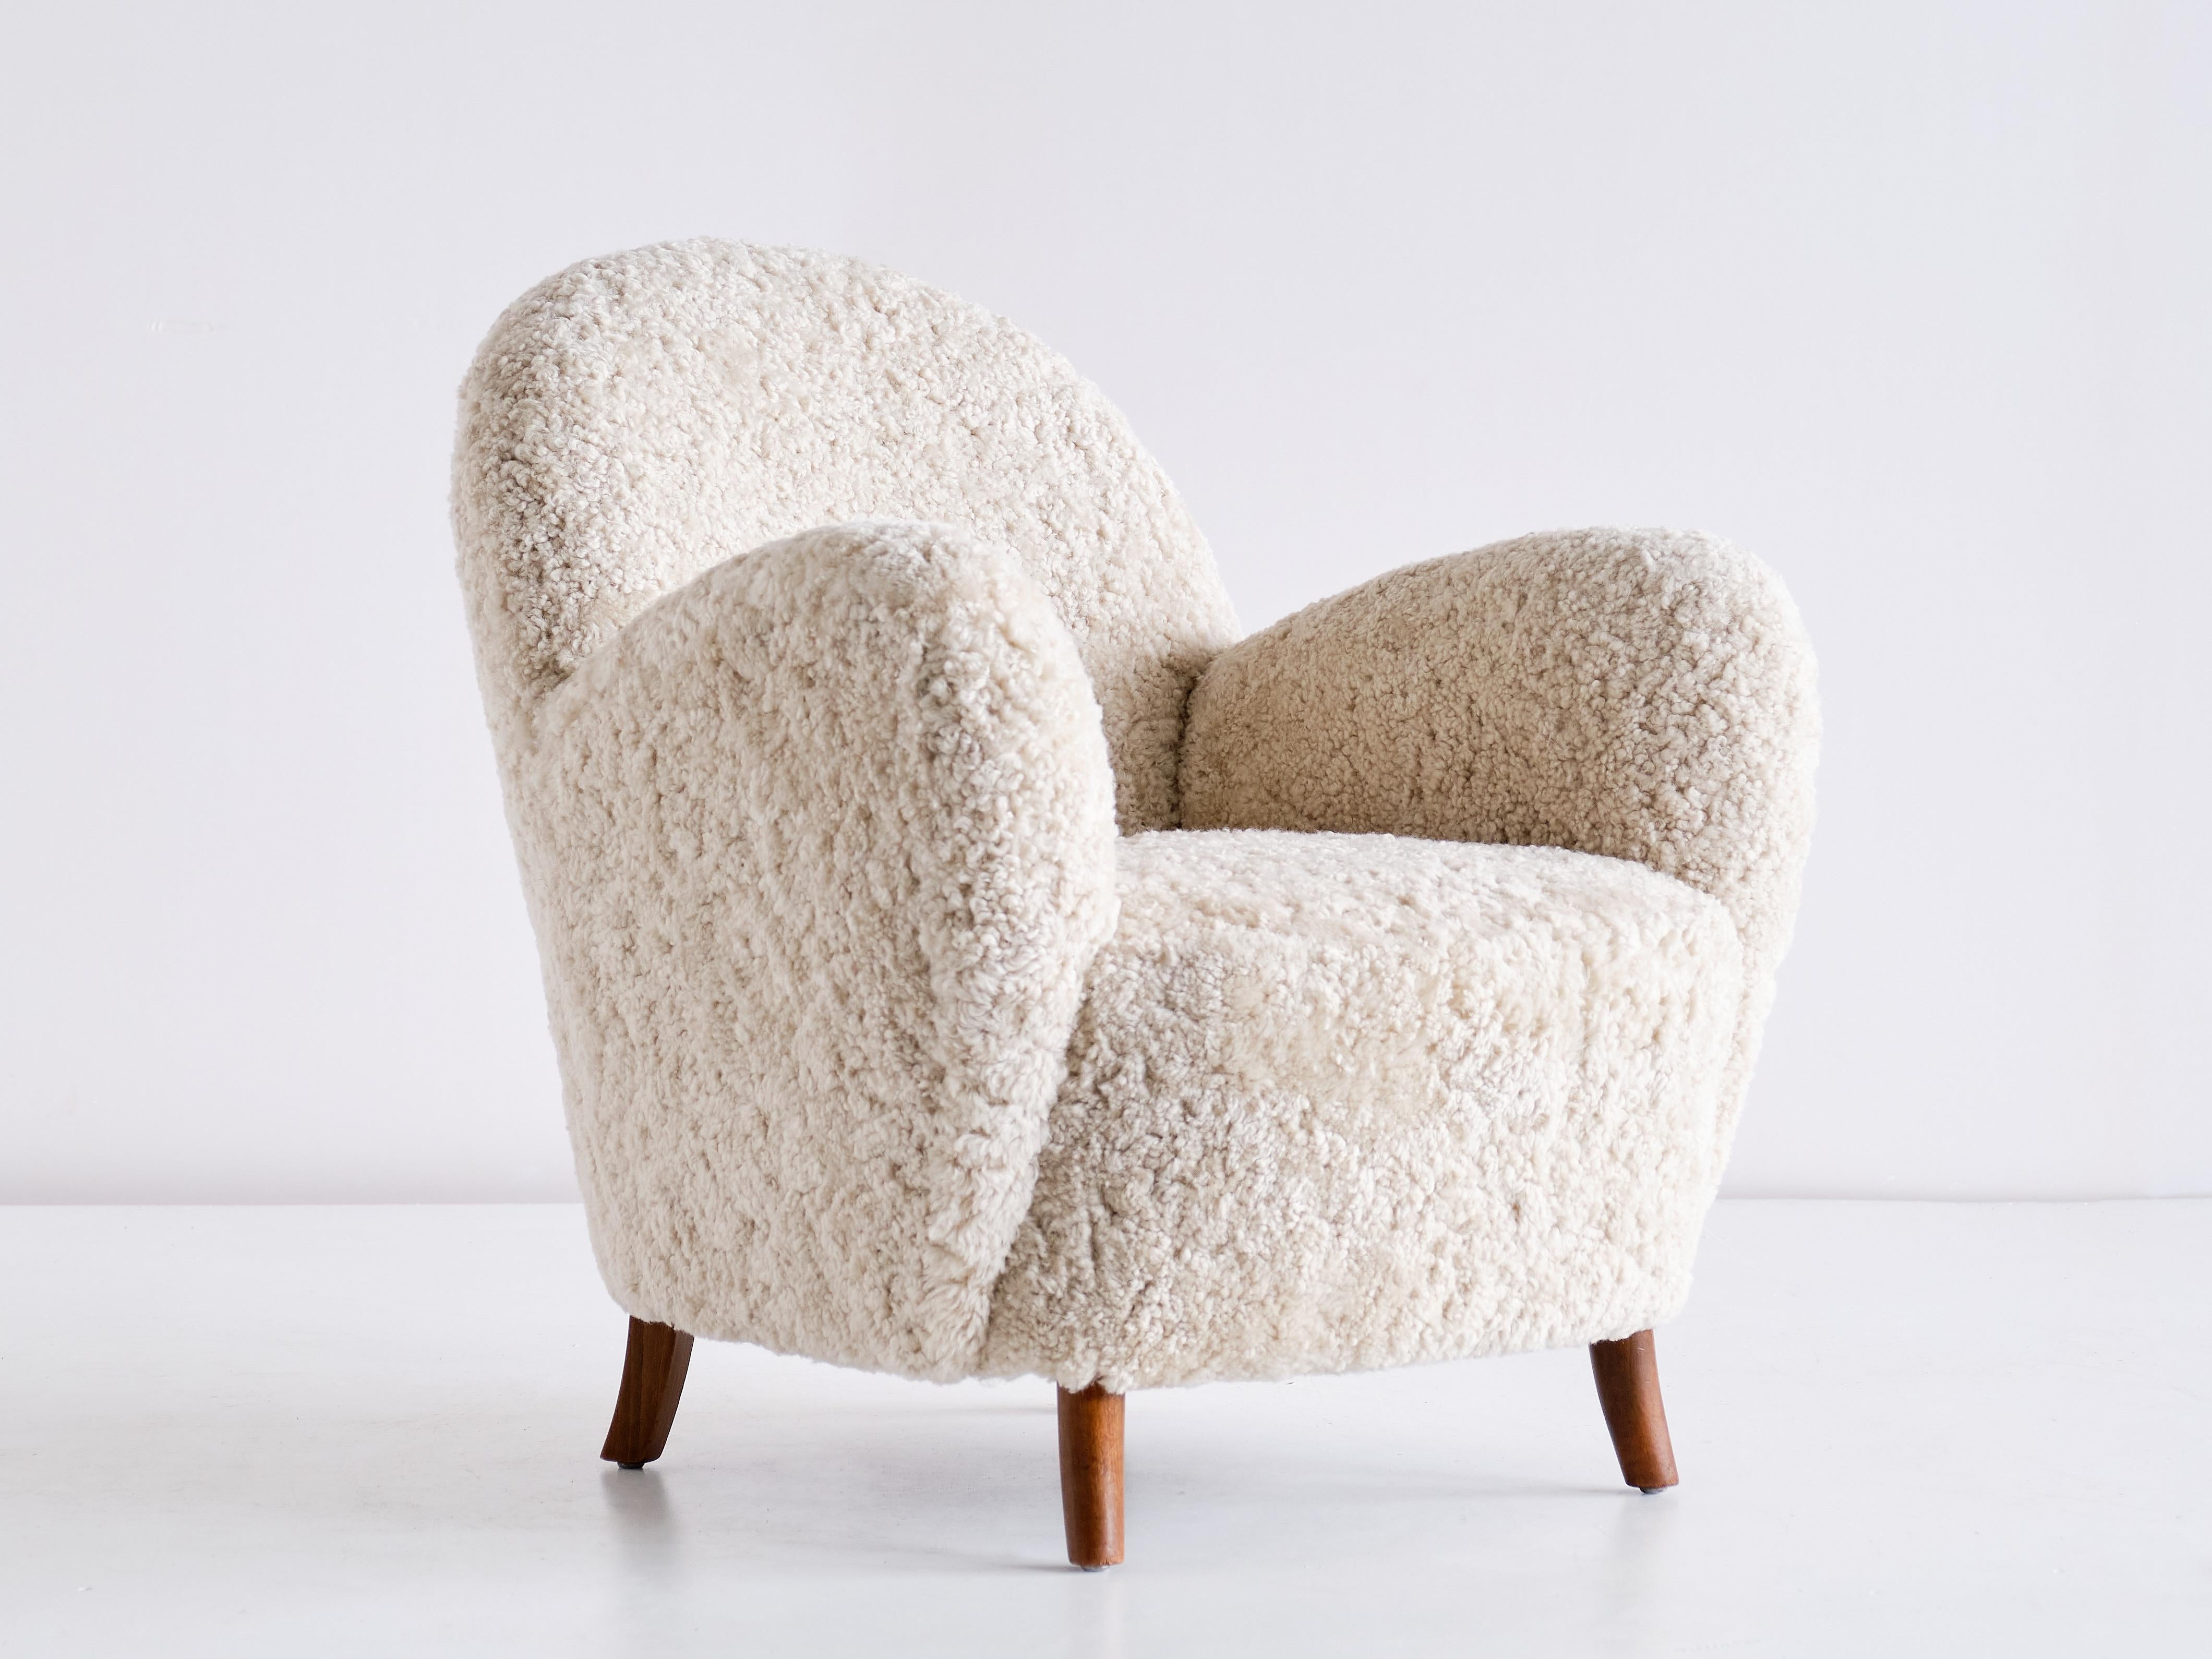 Pair of Thorald Madsen Armchairs in Sheepskin and Beech, Denmark, Mid 1930s For Sale 1